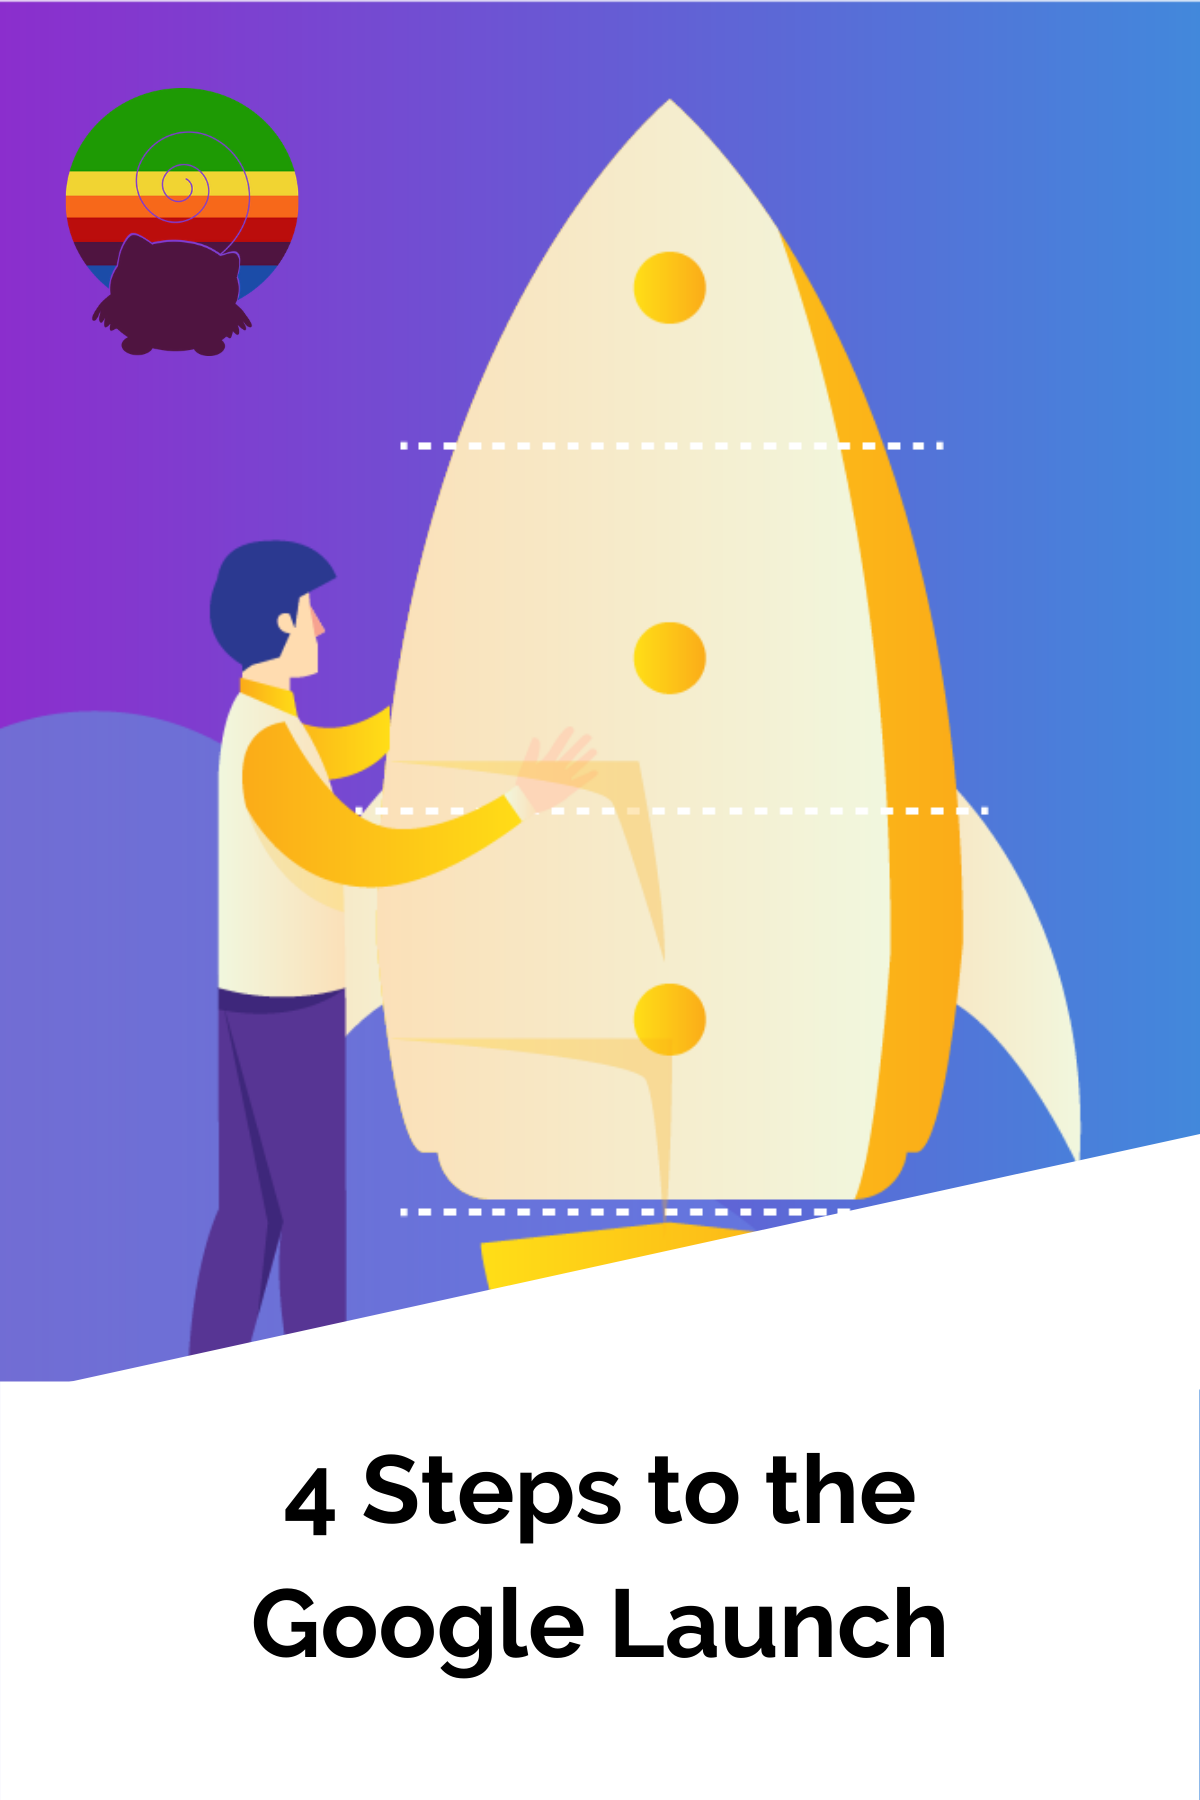 4 Steps to the Google Launch